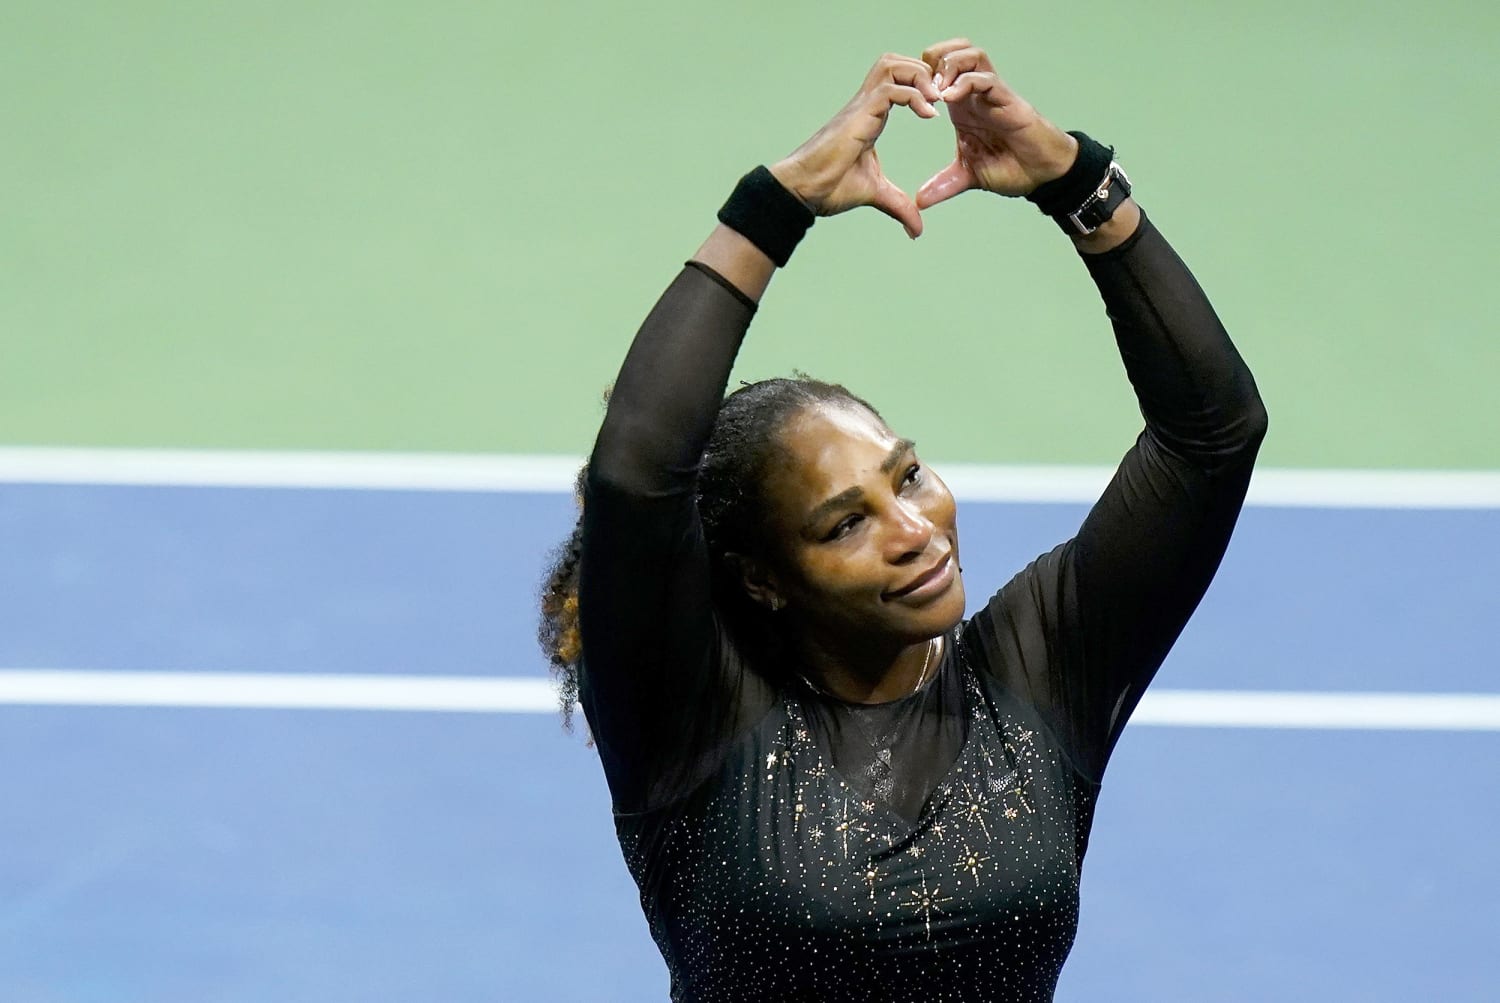 Tennis great Serena Williams is eliminated from the U.S